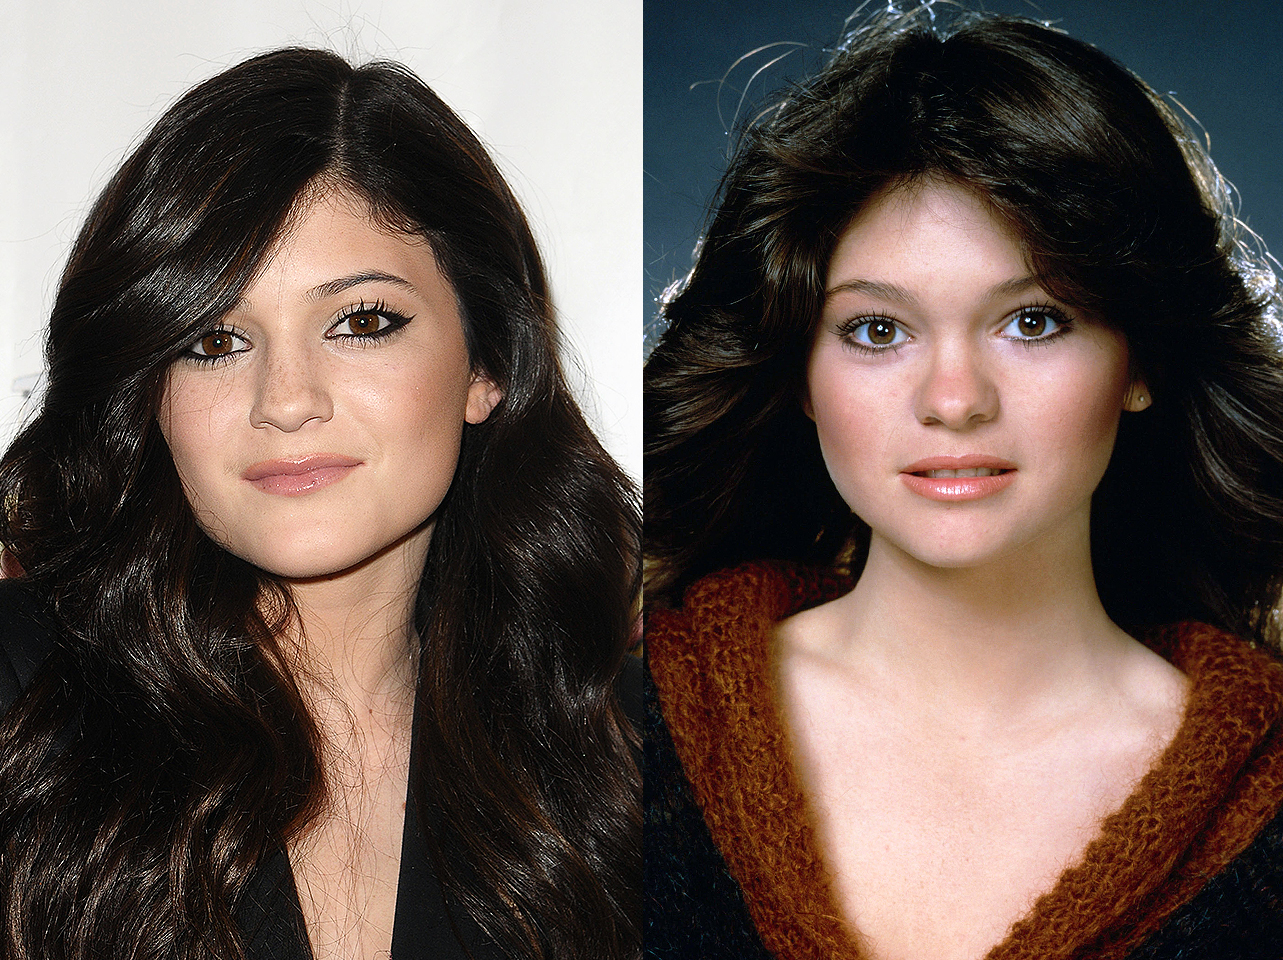 Kylie Jenner and Valerie Bertinelli | Source: Getty Images